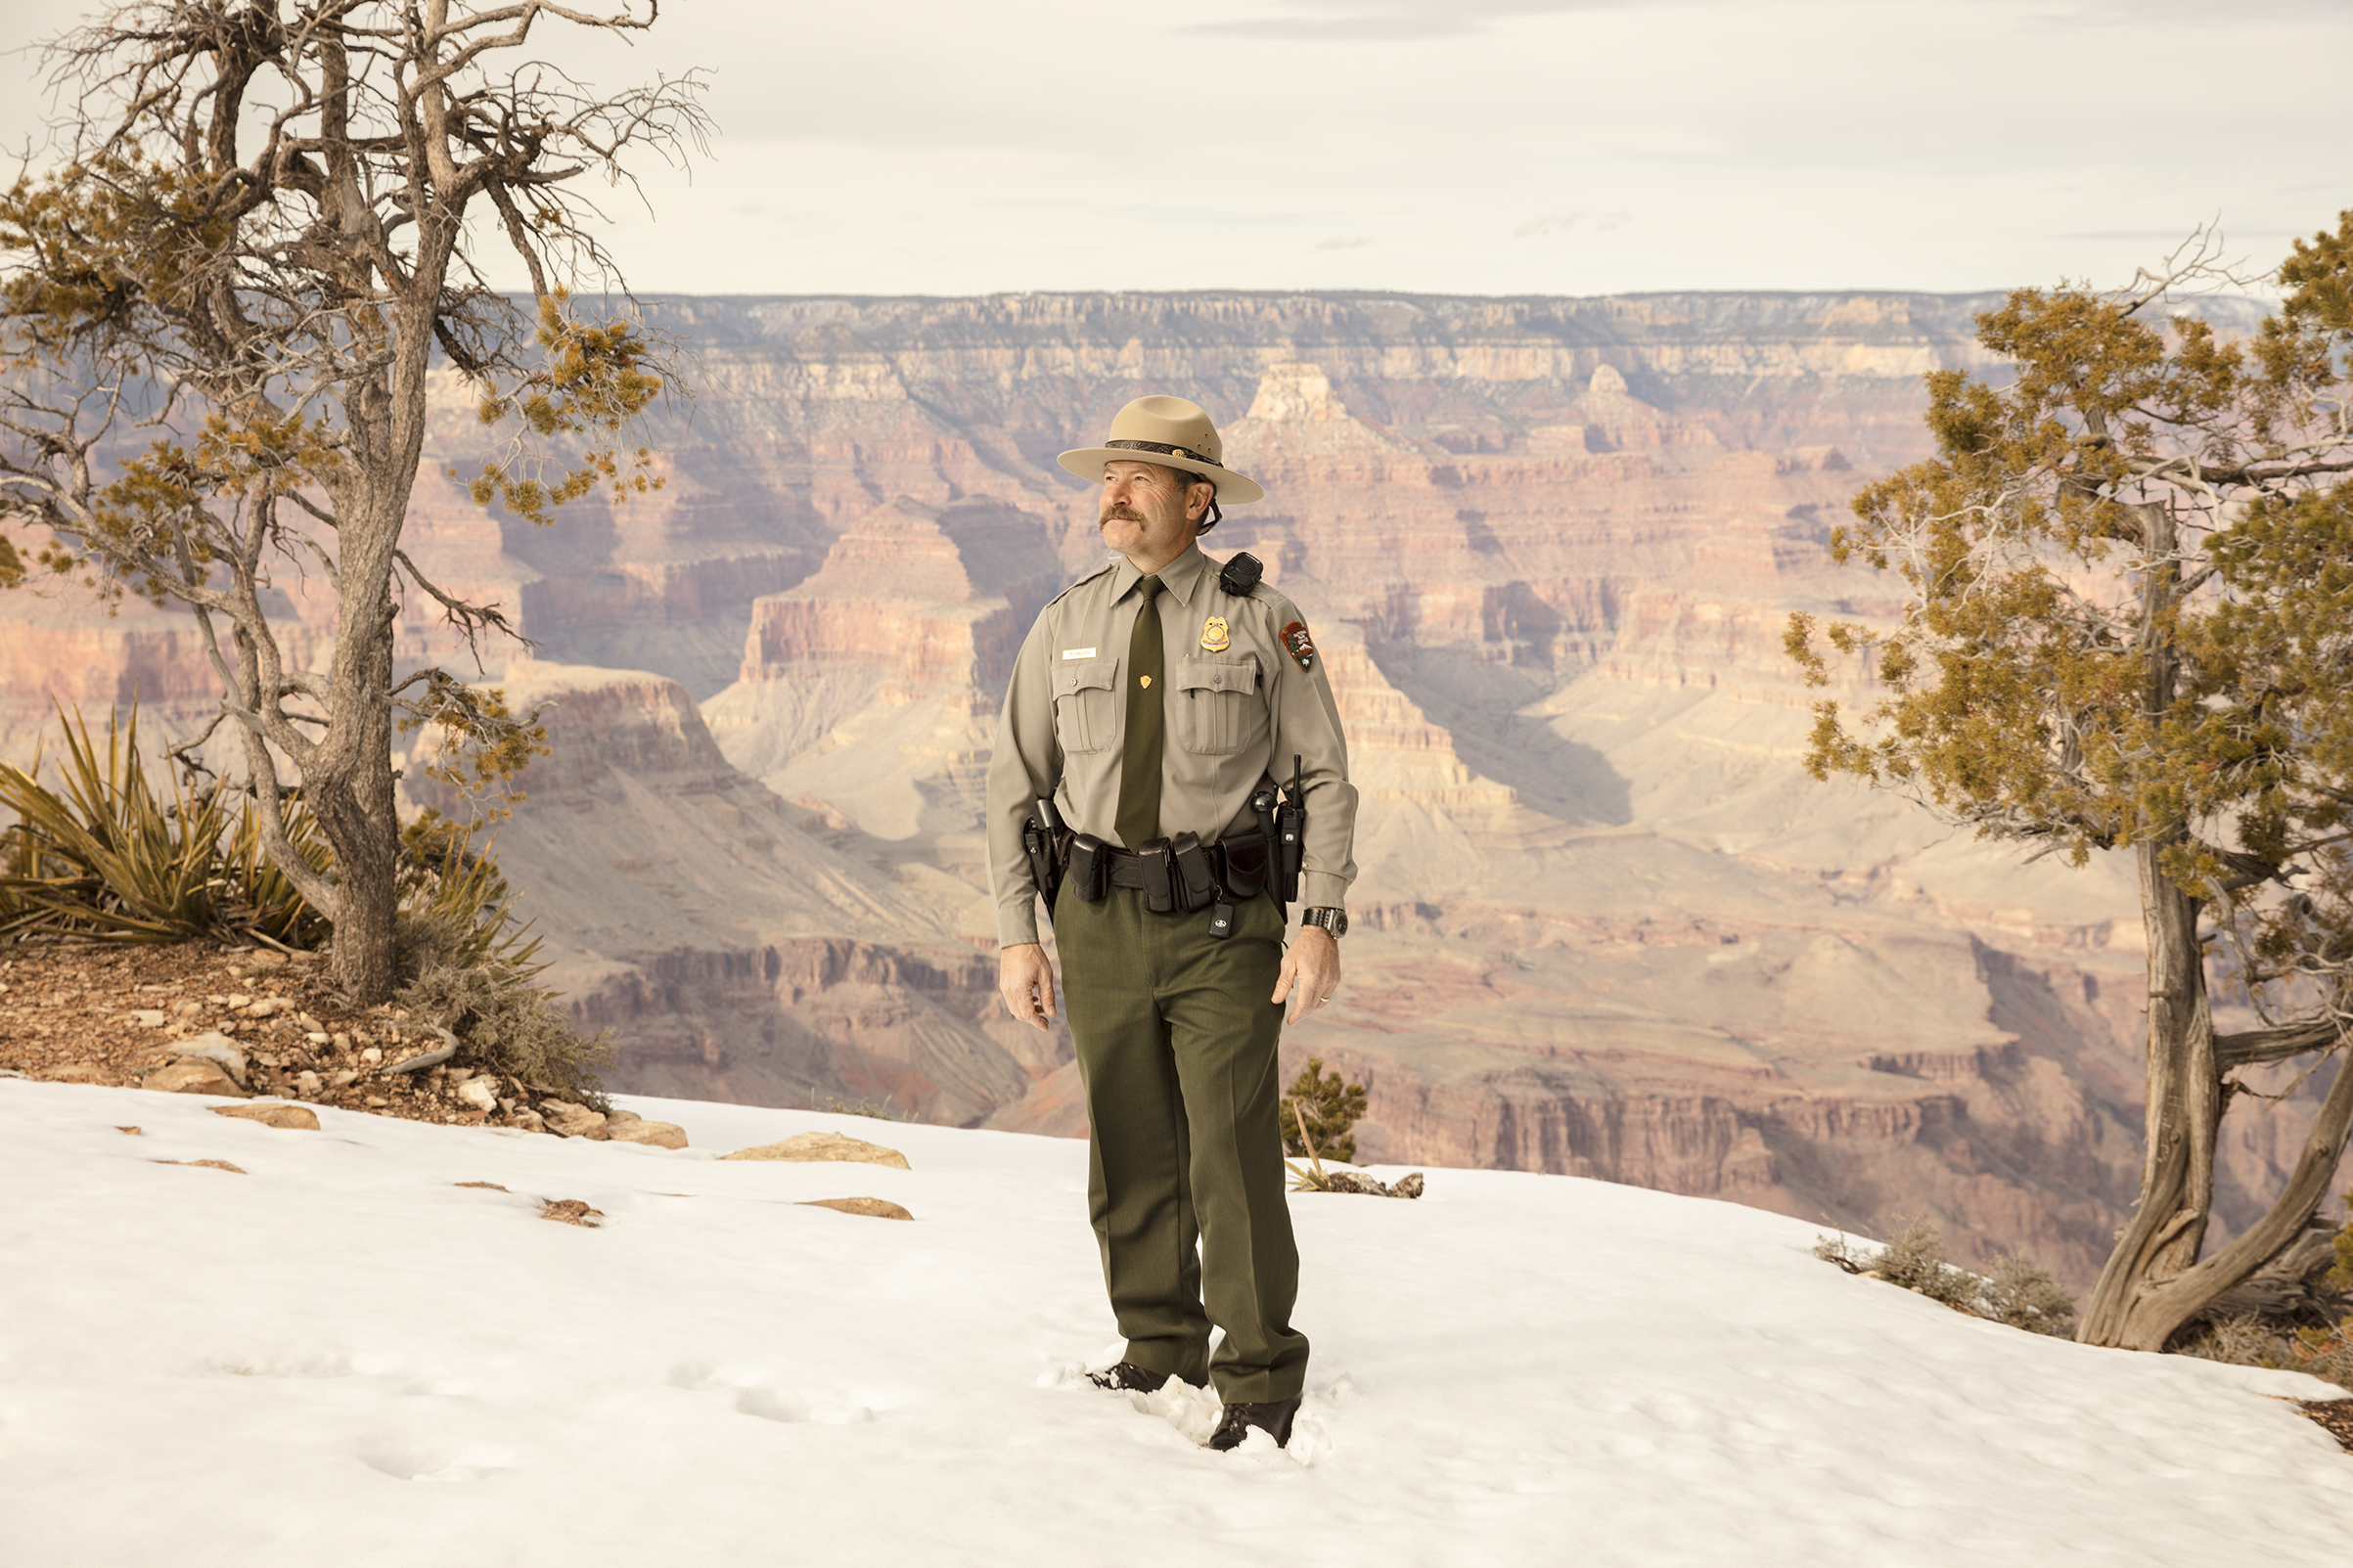 Matthew Vandzura, chief ranger at Grand Canyon National Park, poses for a portrait on March 1 (Jesse Rieser for TIME)